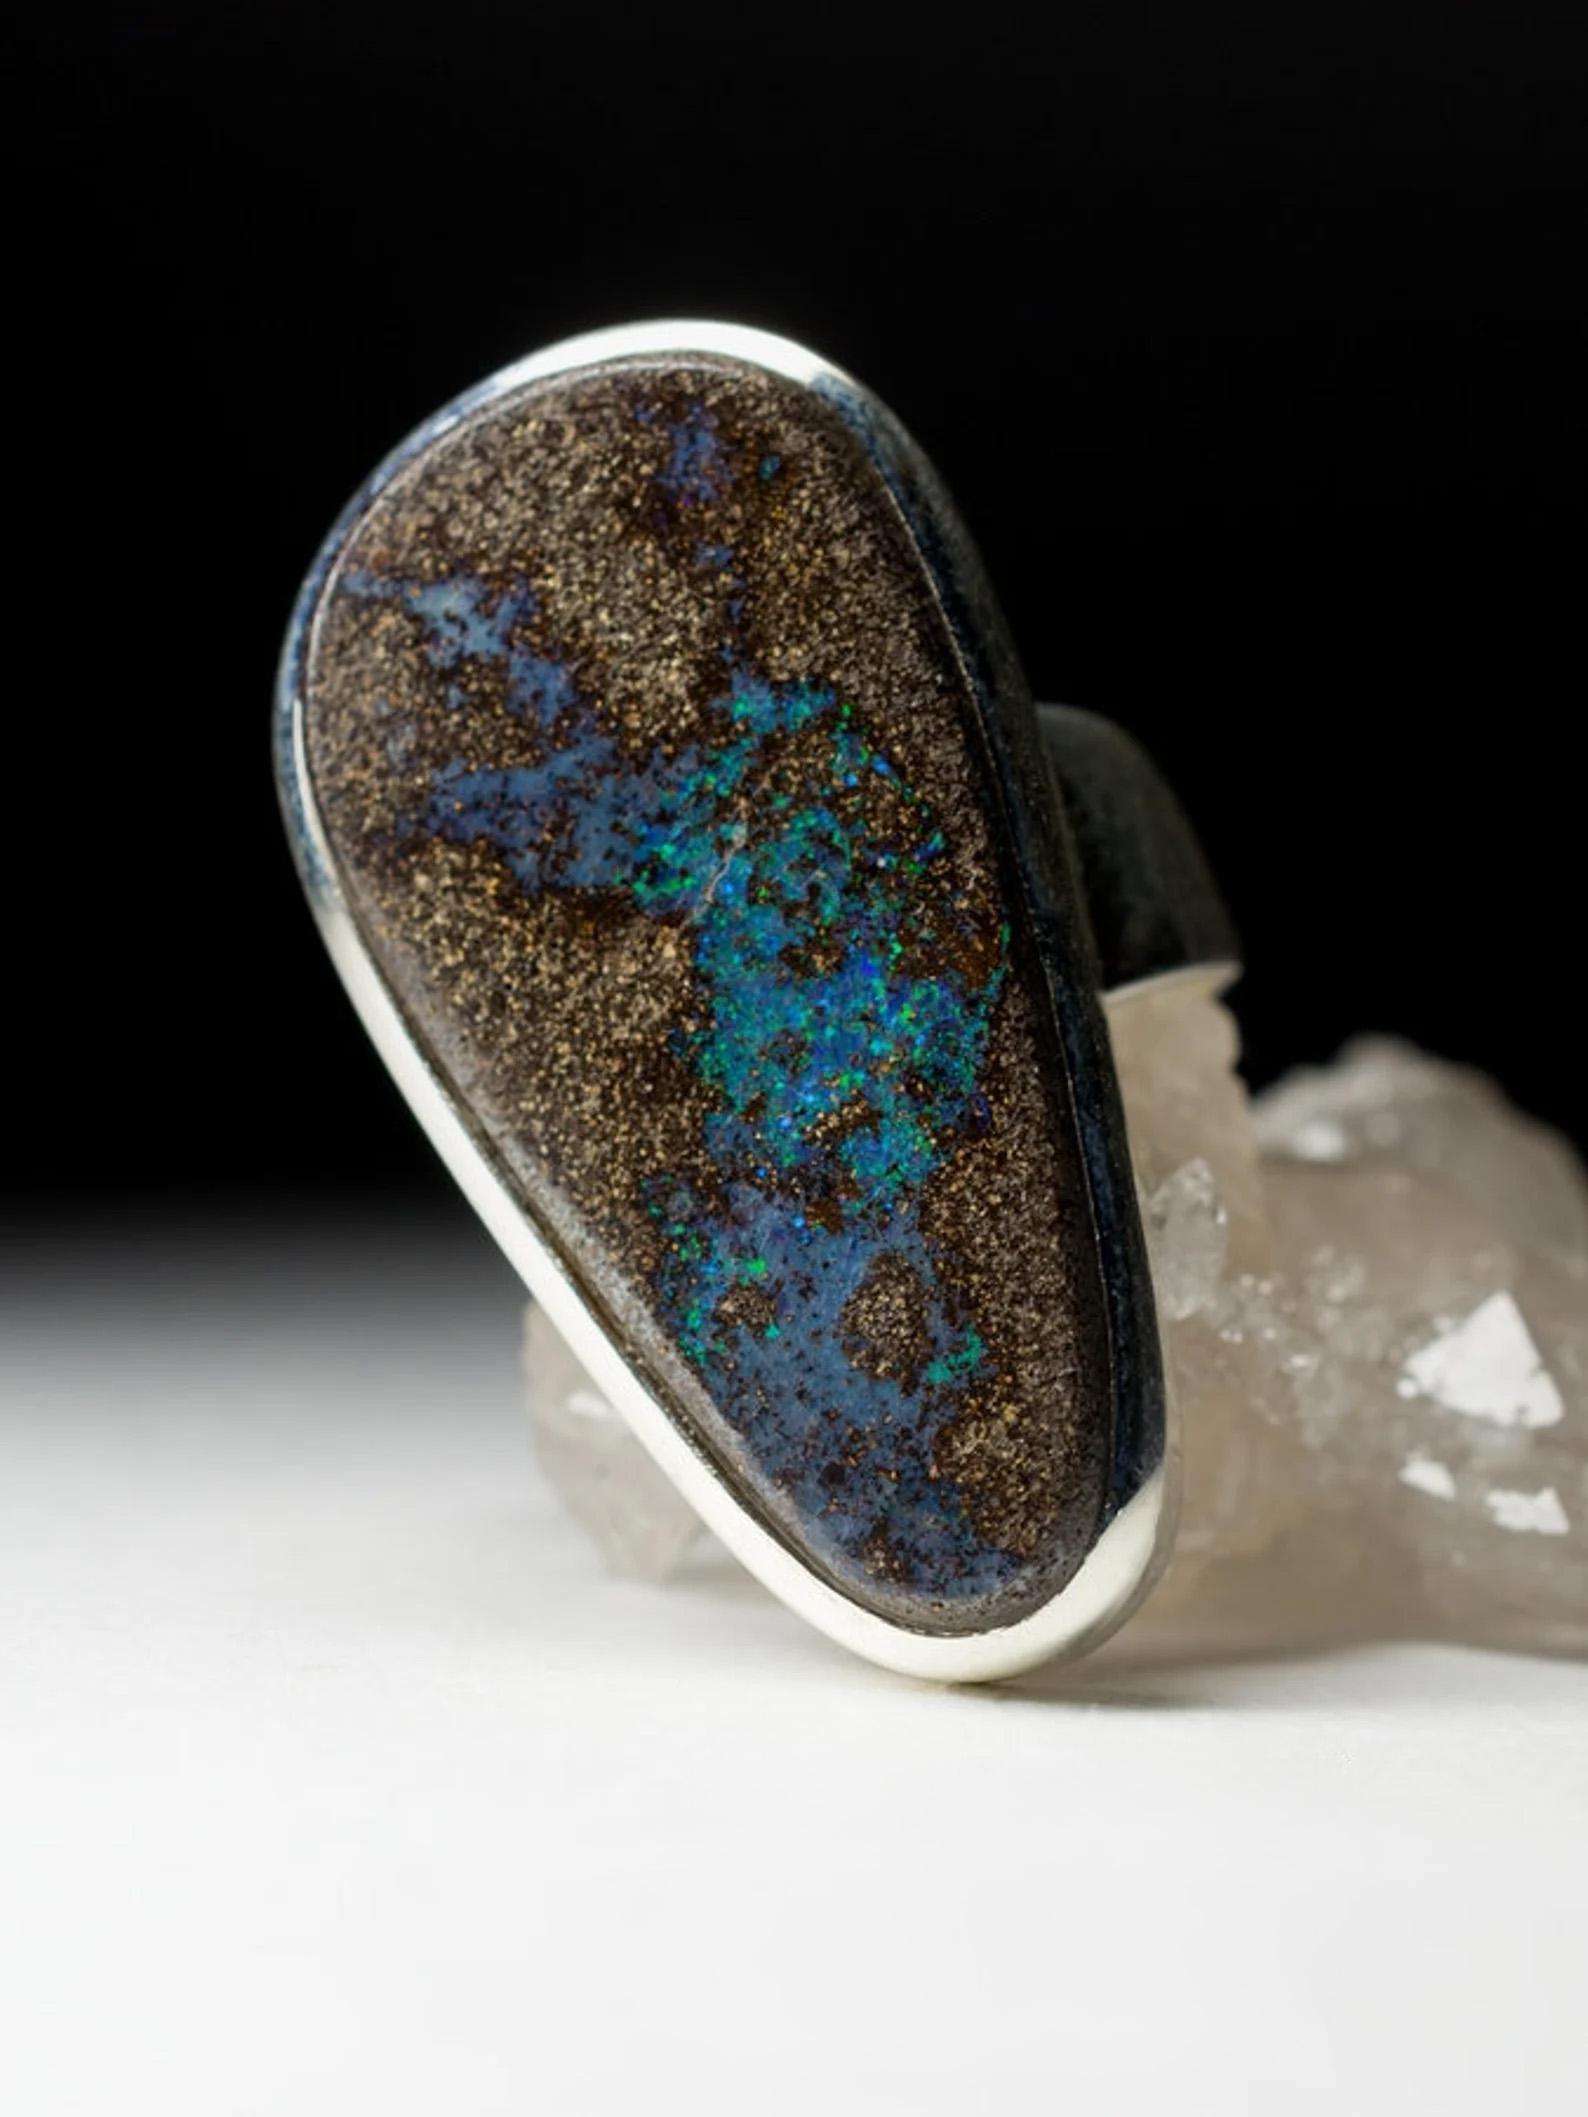 Women's or Men's Big Boulder Opal Silver Ring Chunky Cabochon Turquoise Blue Brown Gemstone